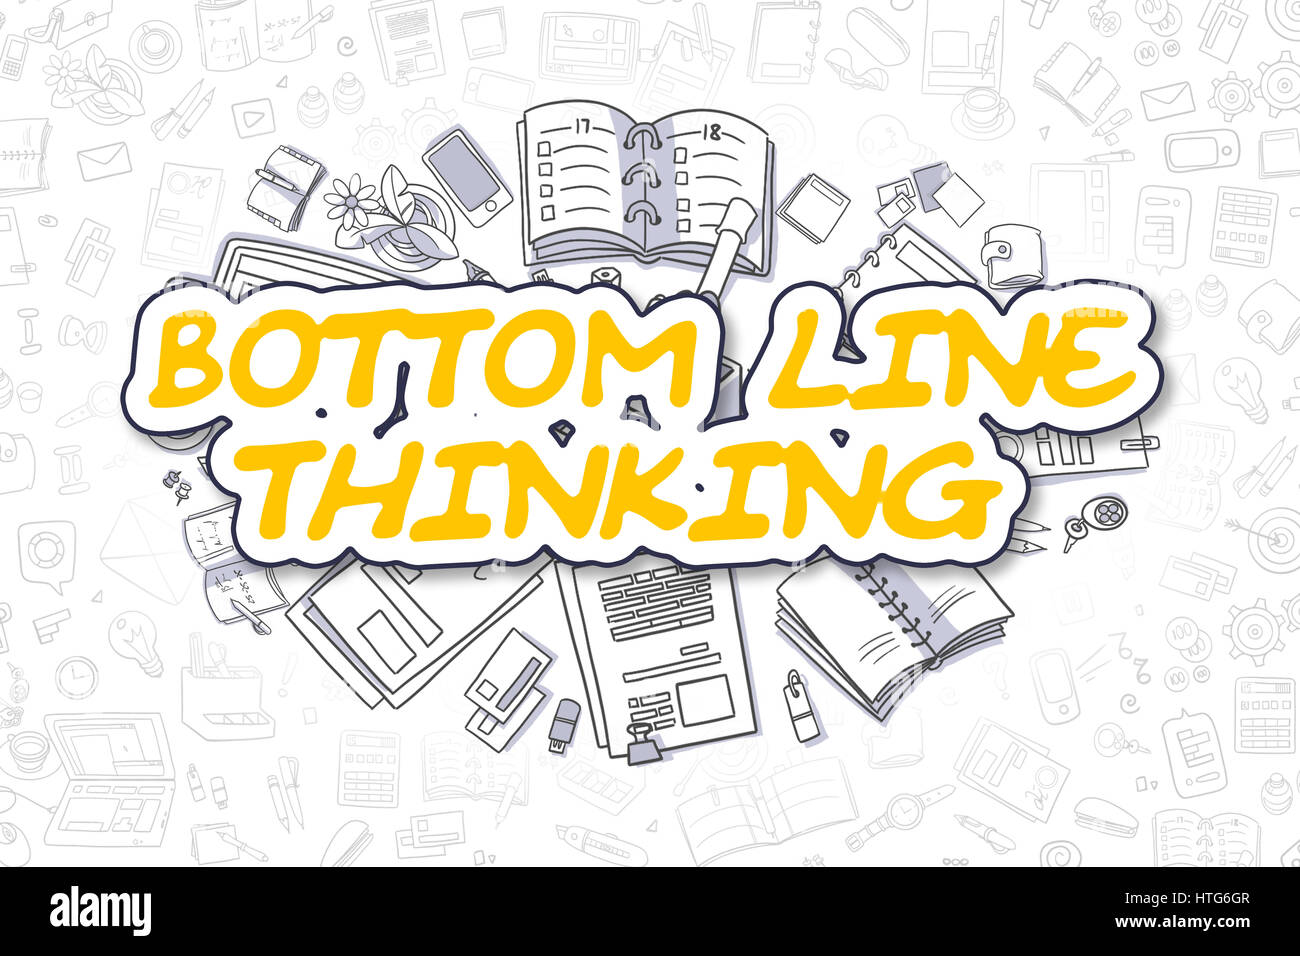 Bottom Line Thinking - Sketch Business Illustration. Yellow Hand Drawn Inscription Bottom Line Thinking Surrounded by Stationery. Doodle Design Elemen Stock Photo